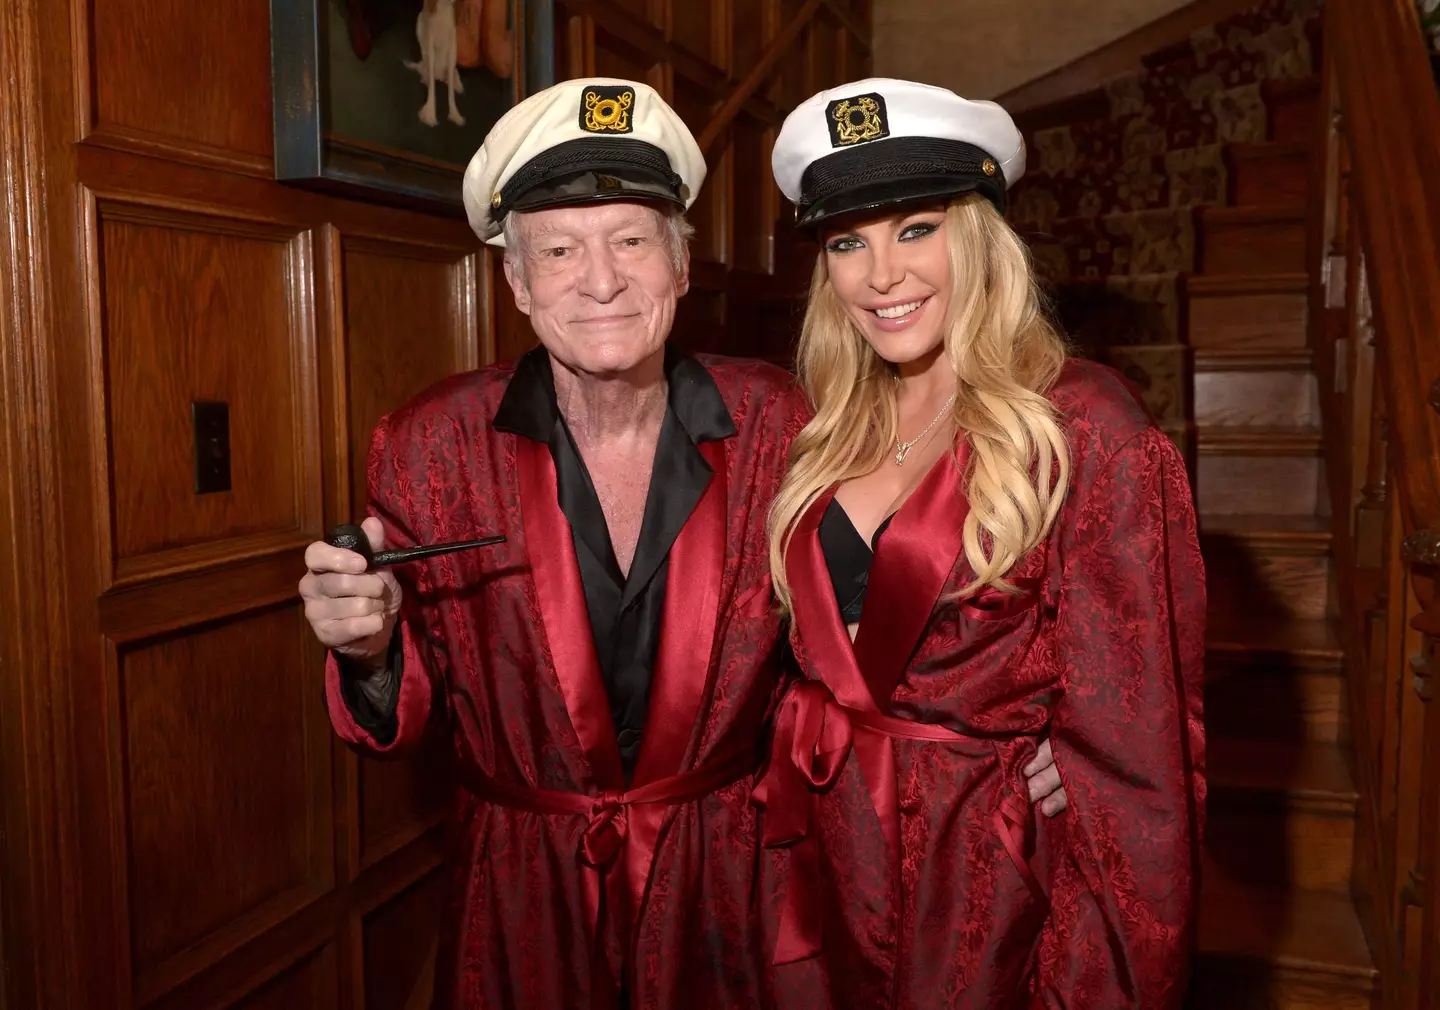 Crystal Hefner has opened up on what it was like being married to the infamous Hugh Hefner.